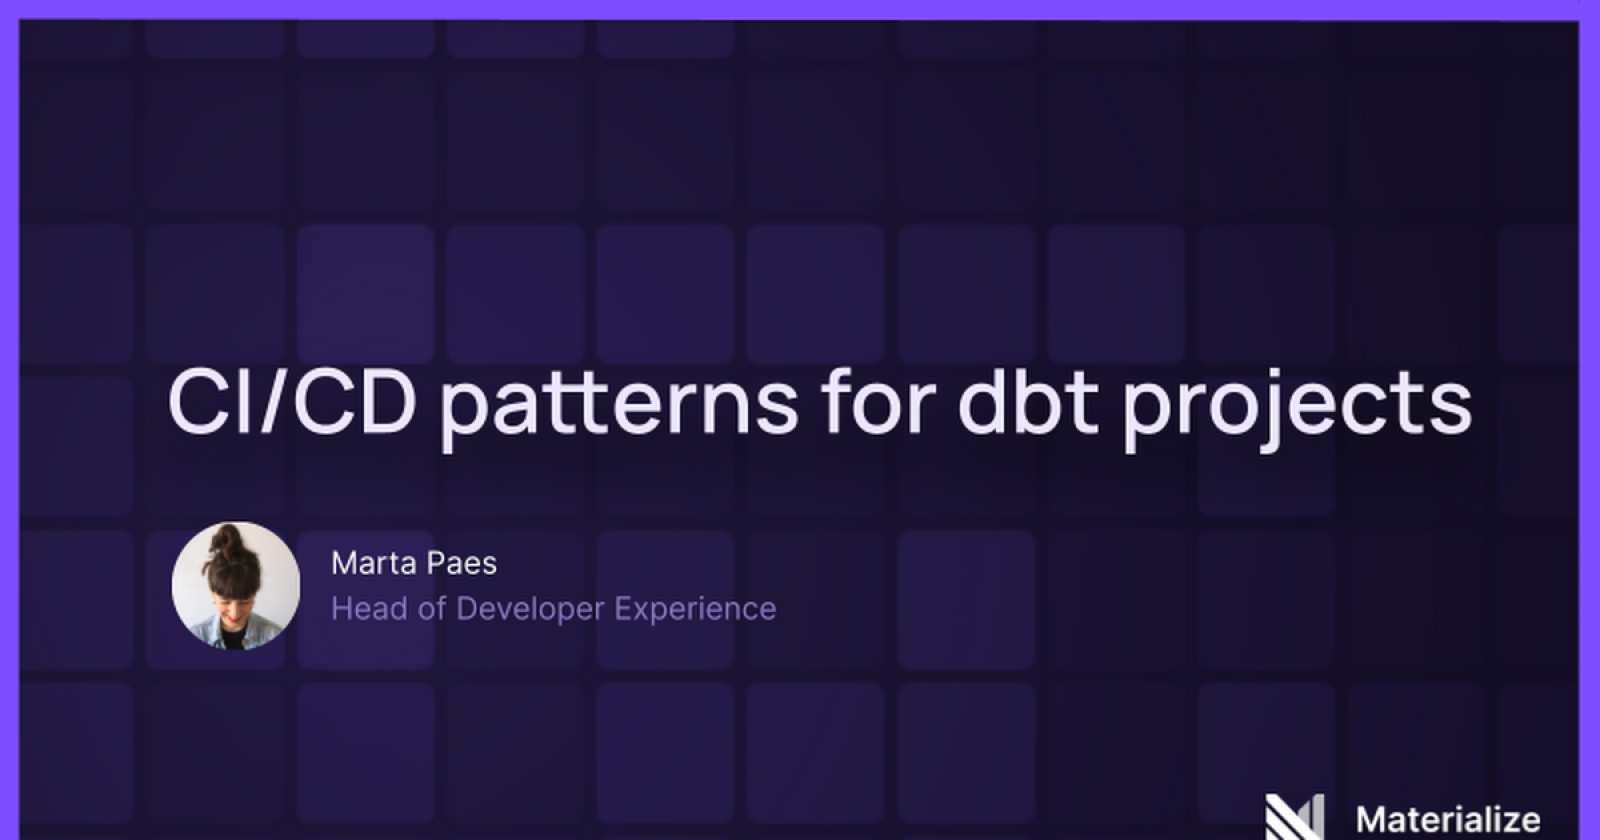 CI/CD patterns for dbt projects